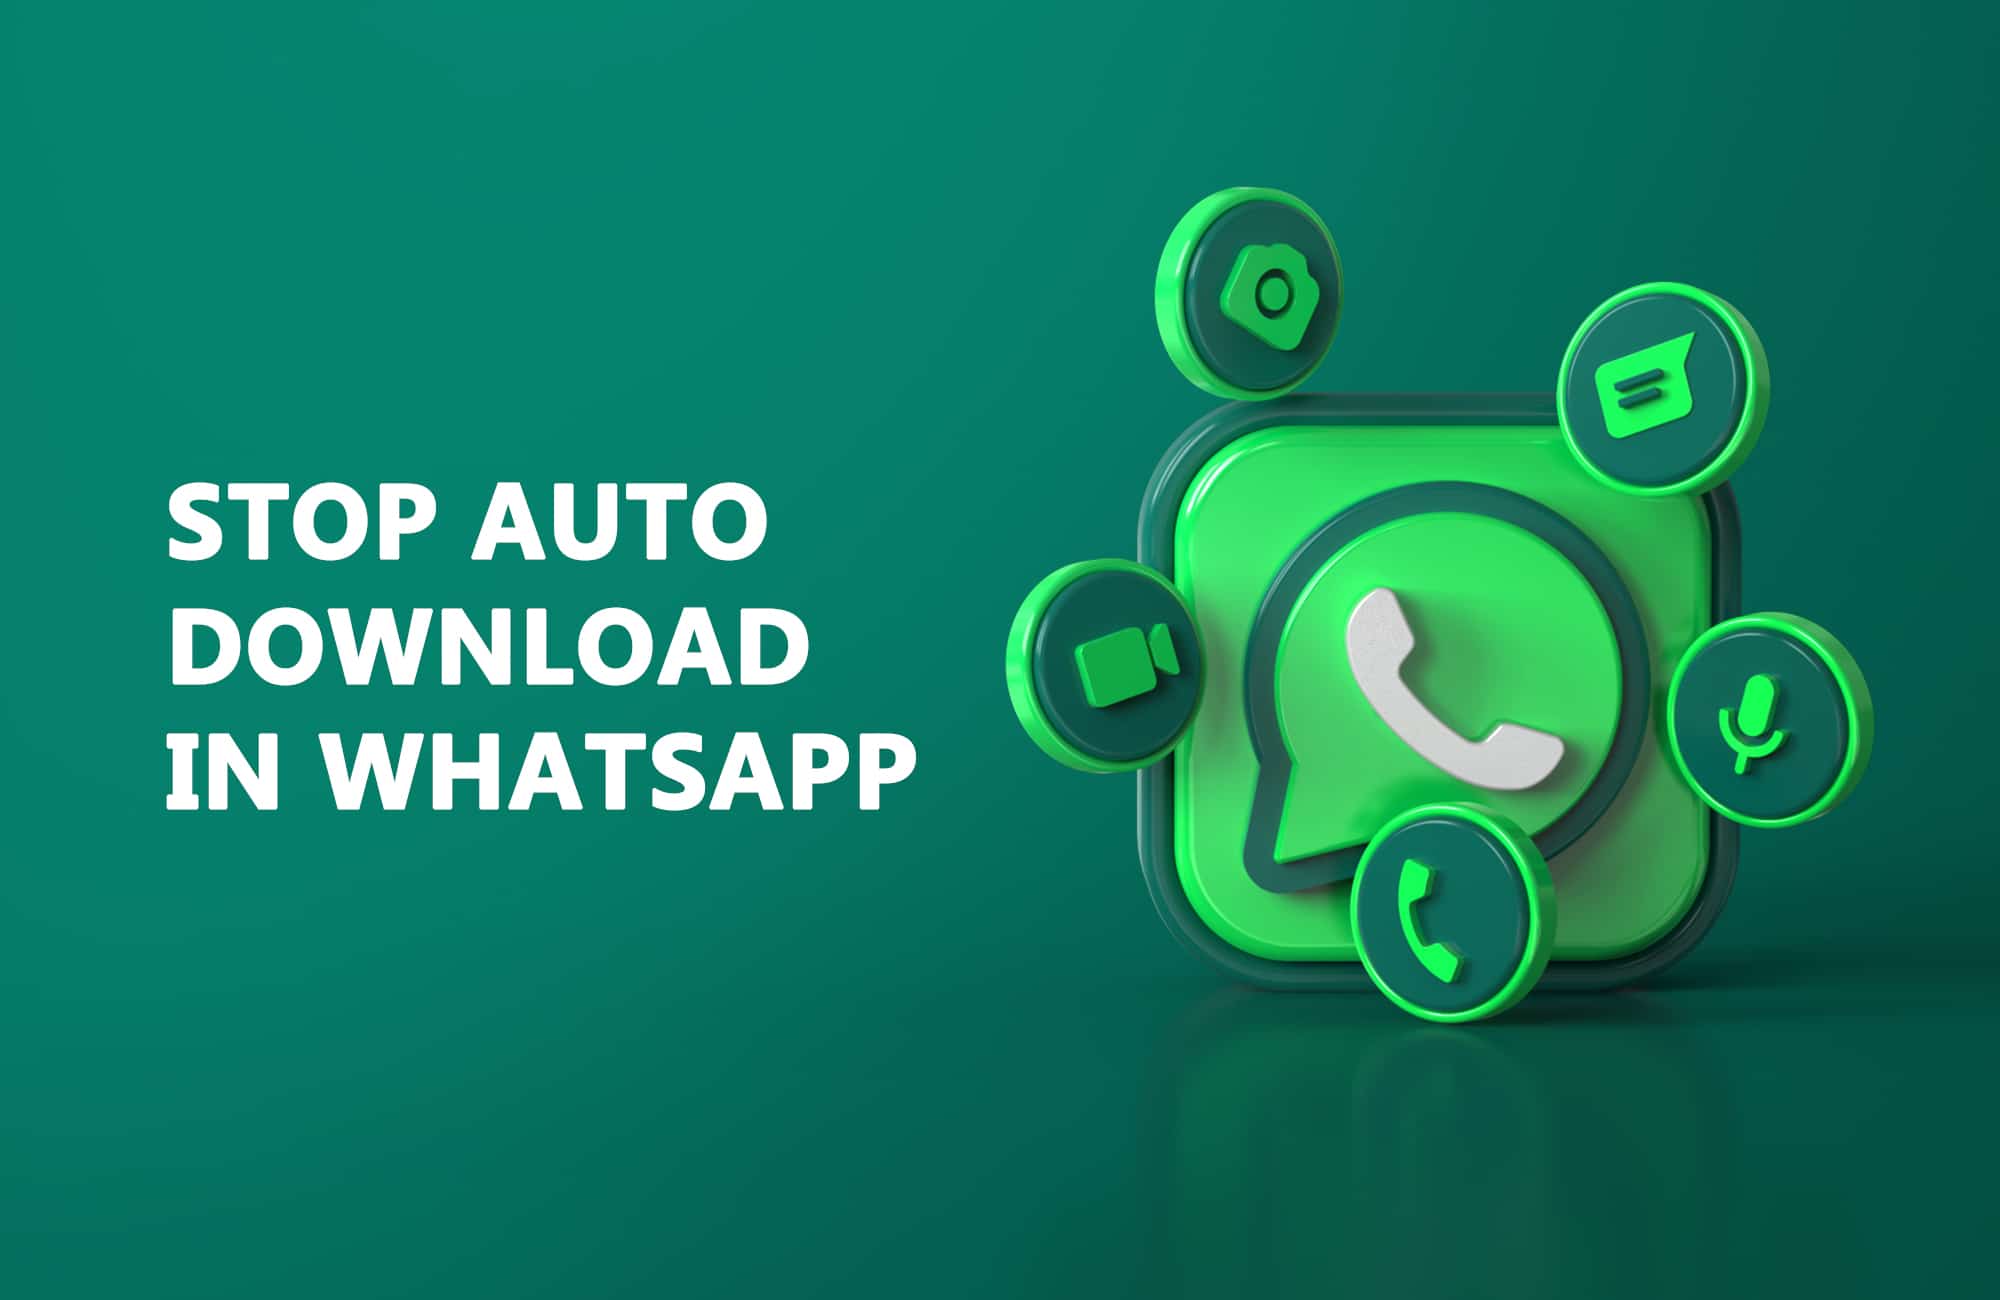 How to Stop Auto Download in WhatsApp on Android and iPhone